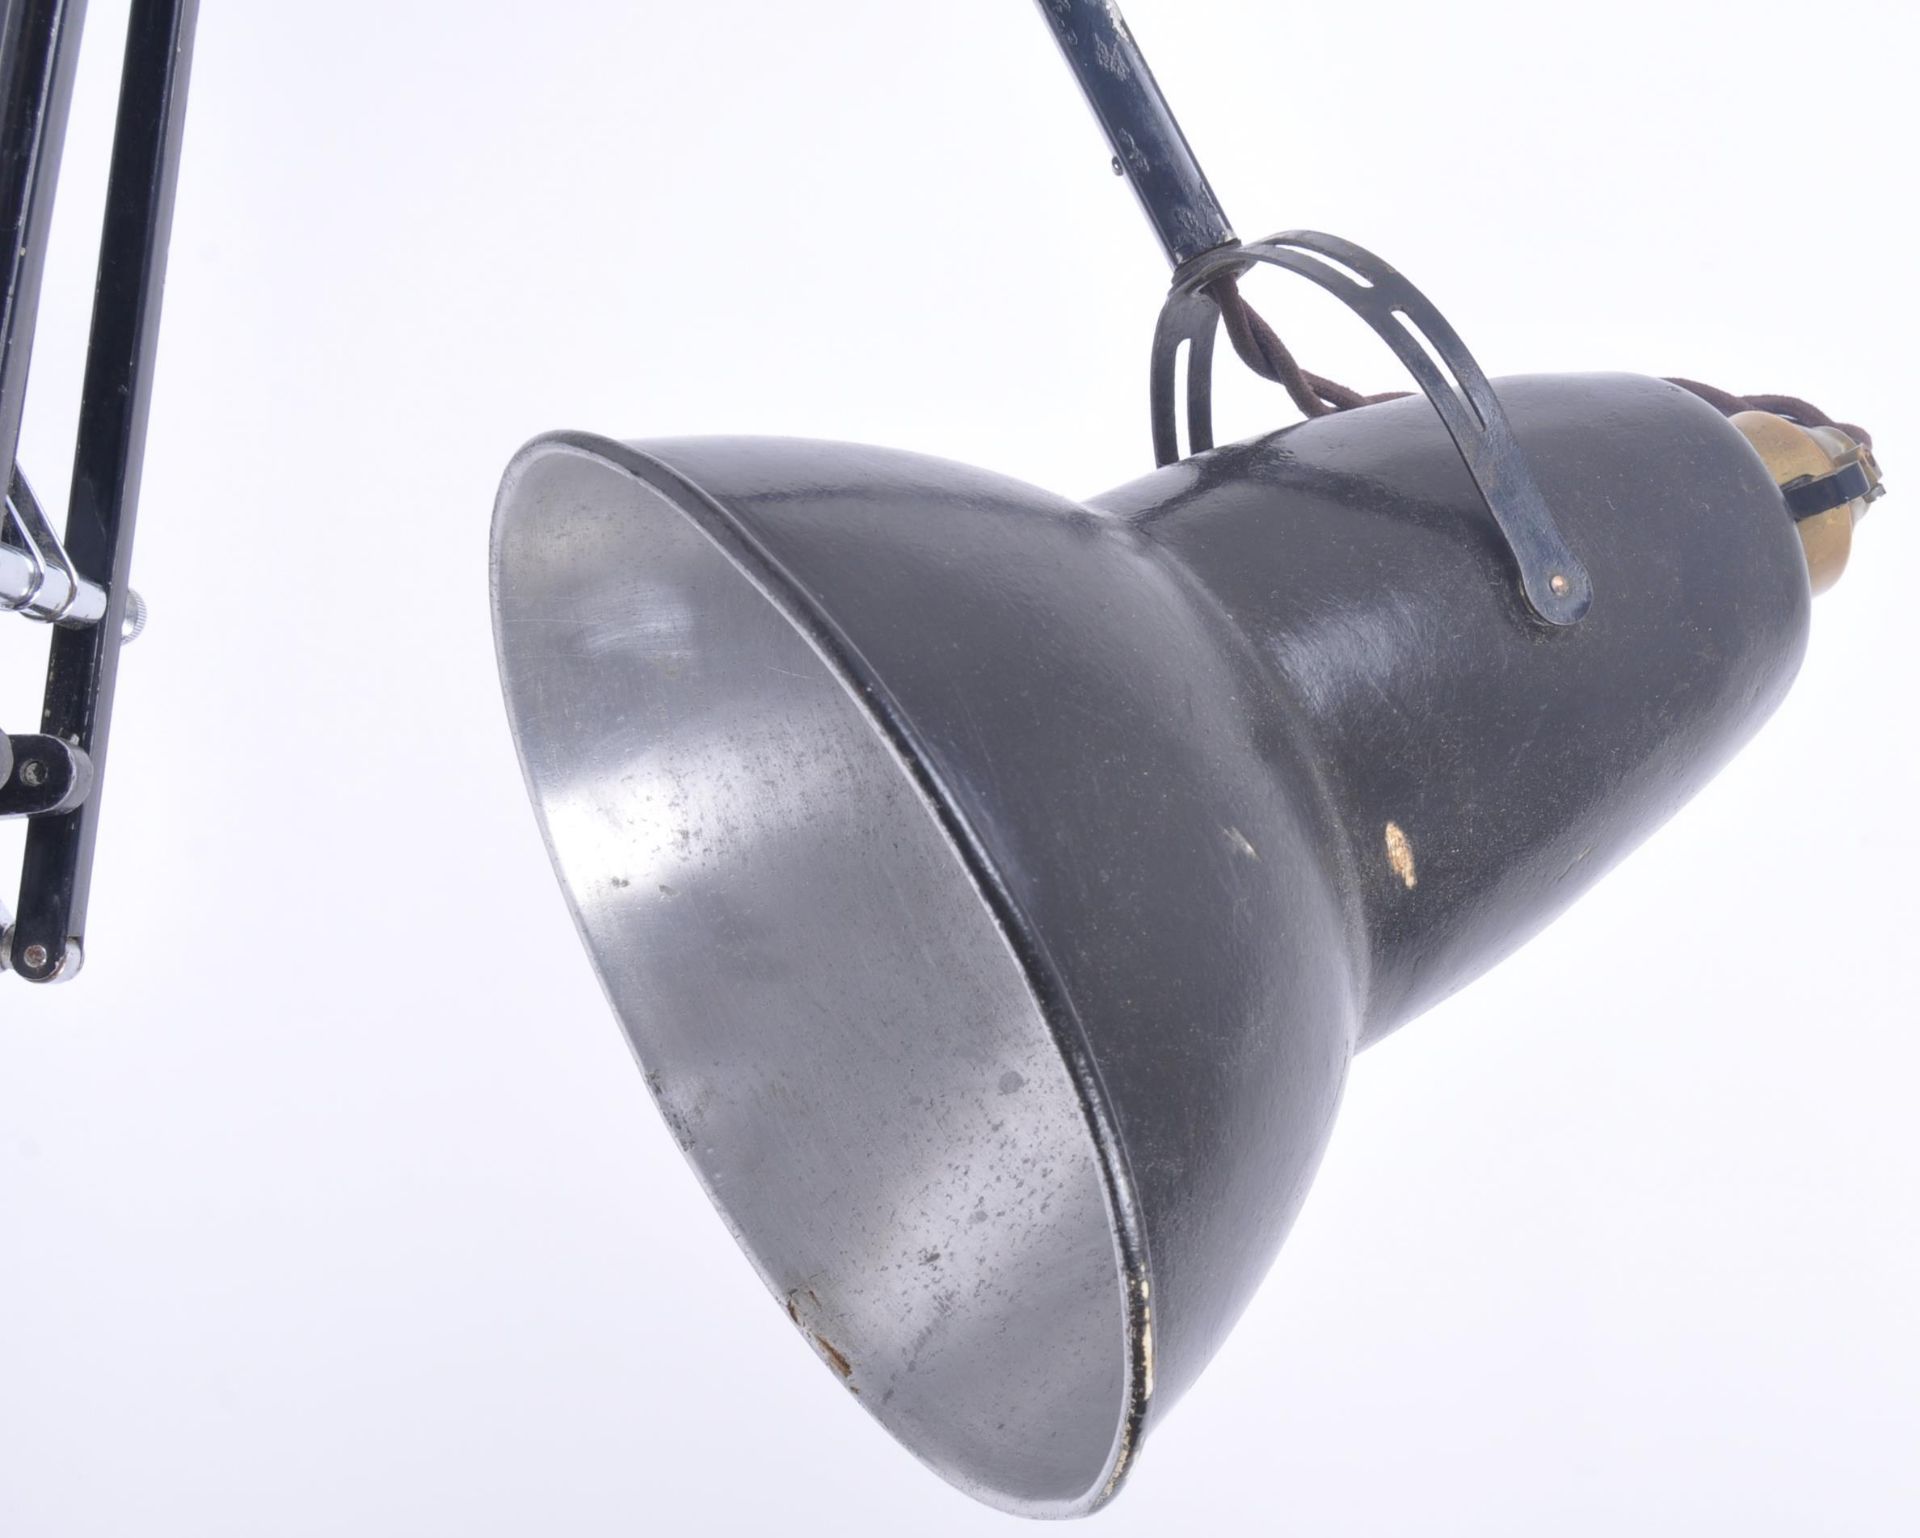 HERBERT TERRY - EARLY BLACK ANGLEPOISE LAMP ON ROUND BASE - Image 2 of 7